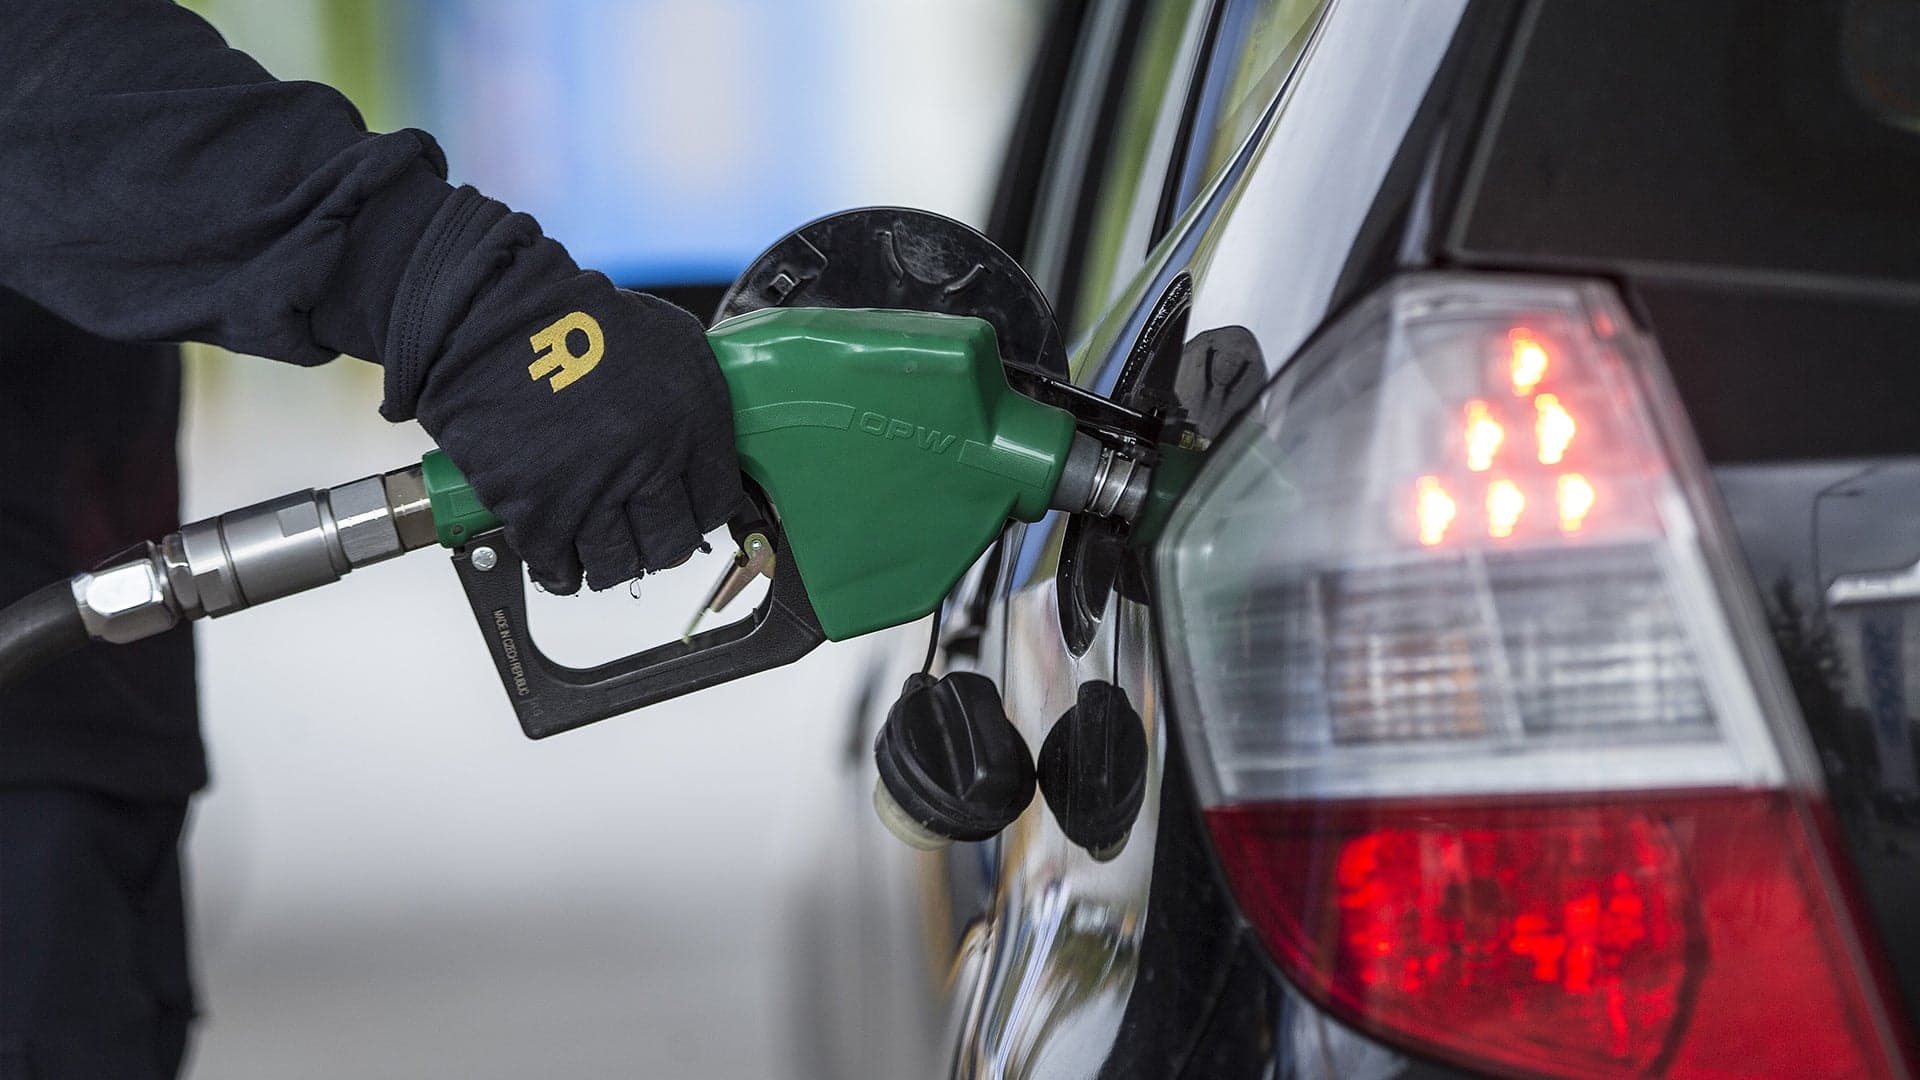 EPA Looks to Move Forward With Blending More Ethanol in Your Summer Gasoline